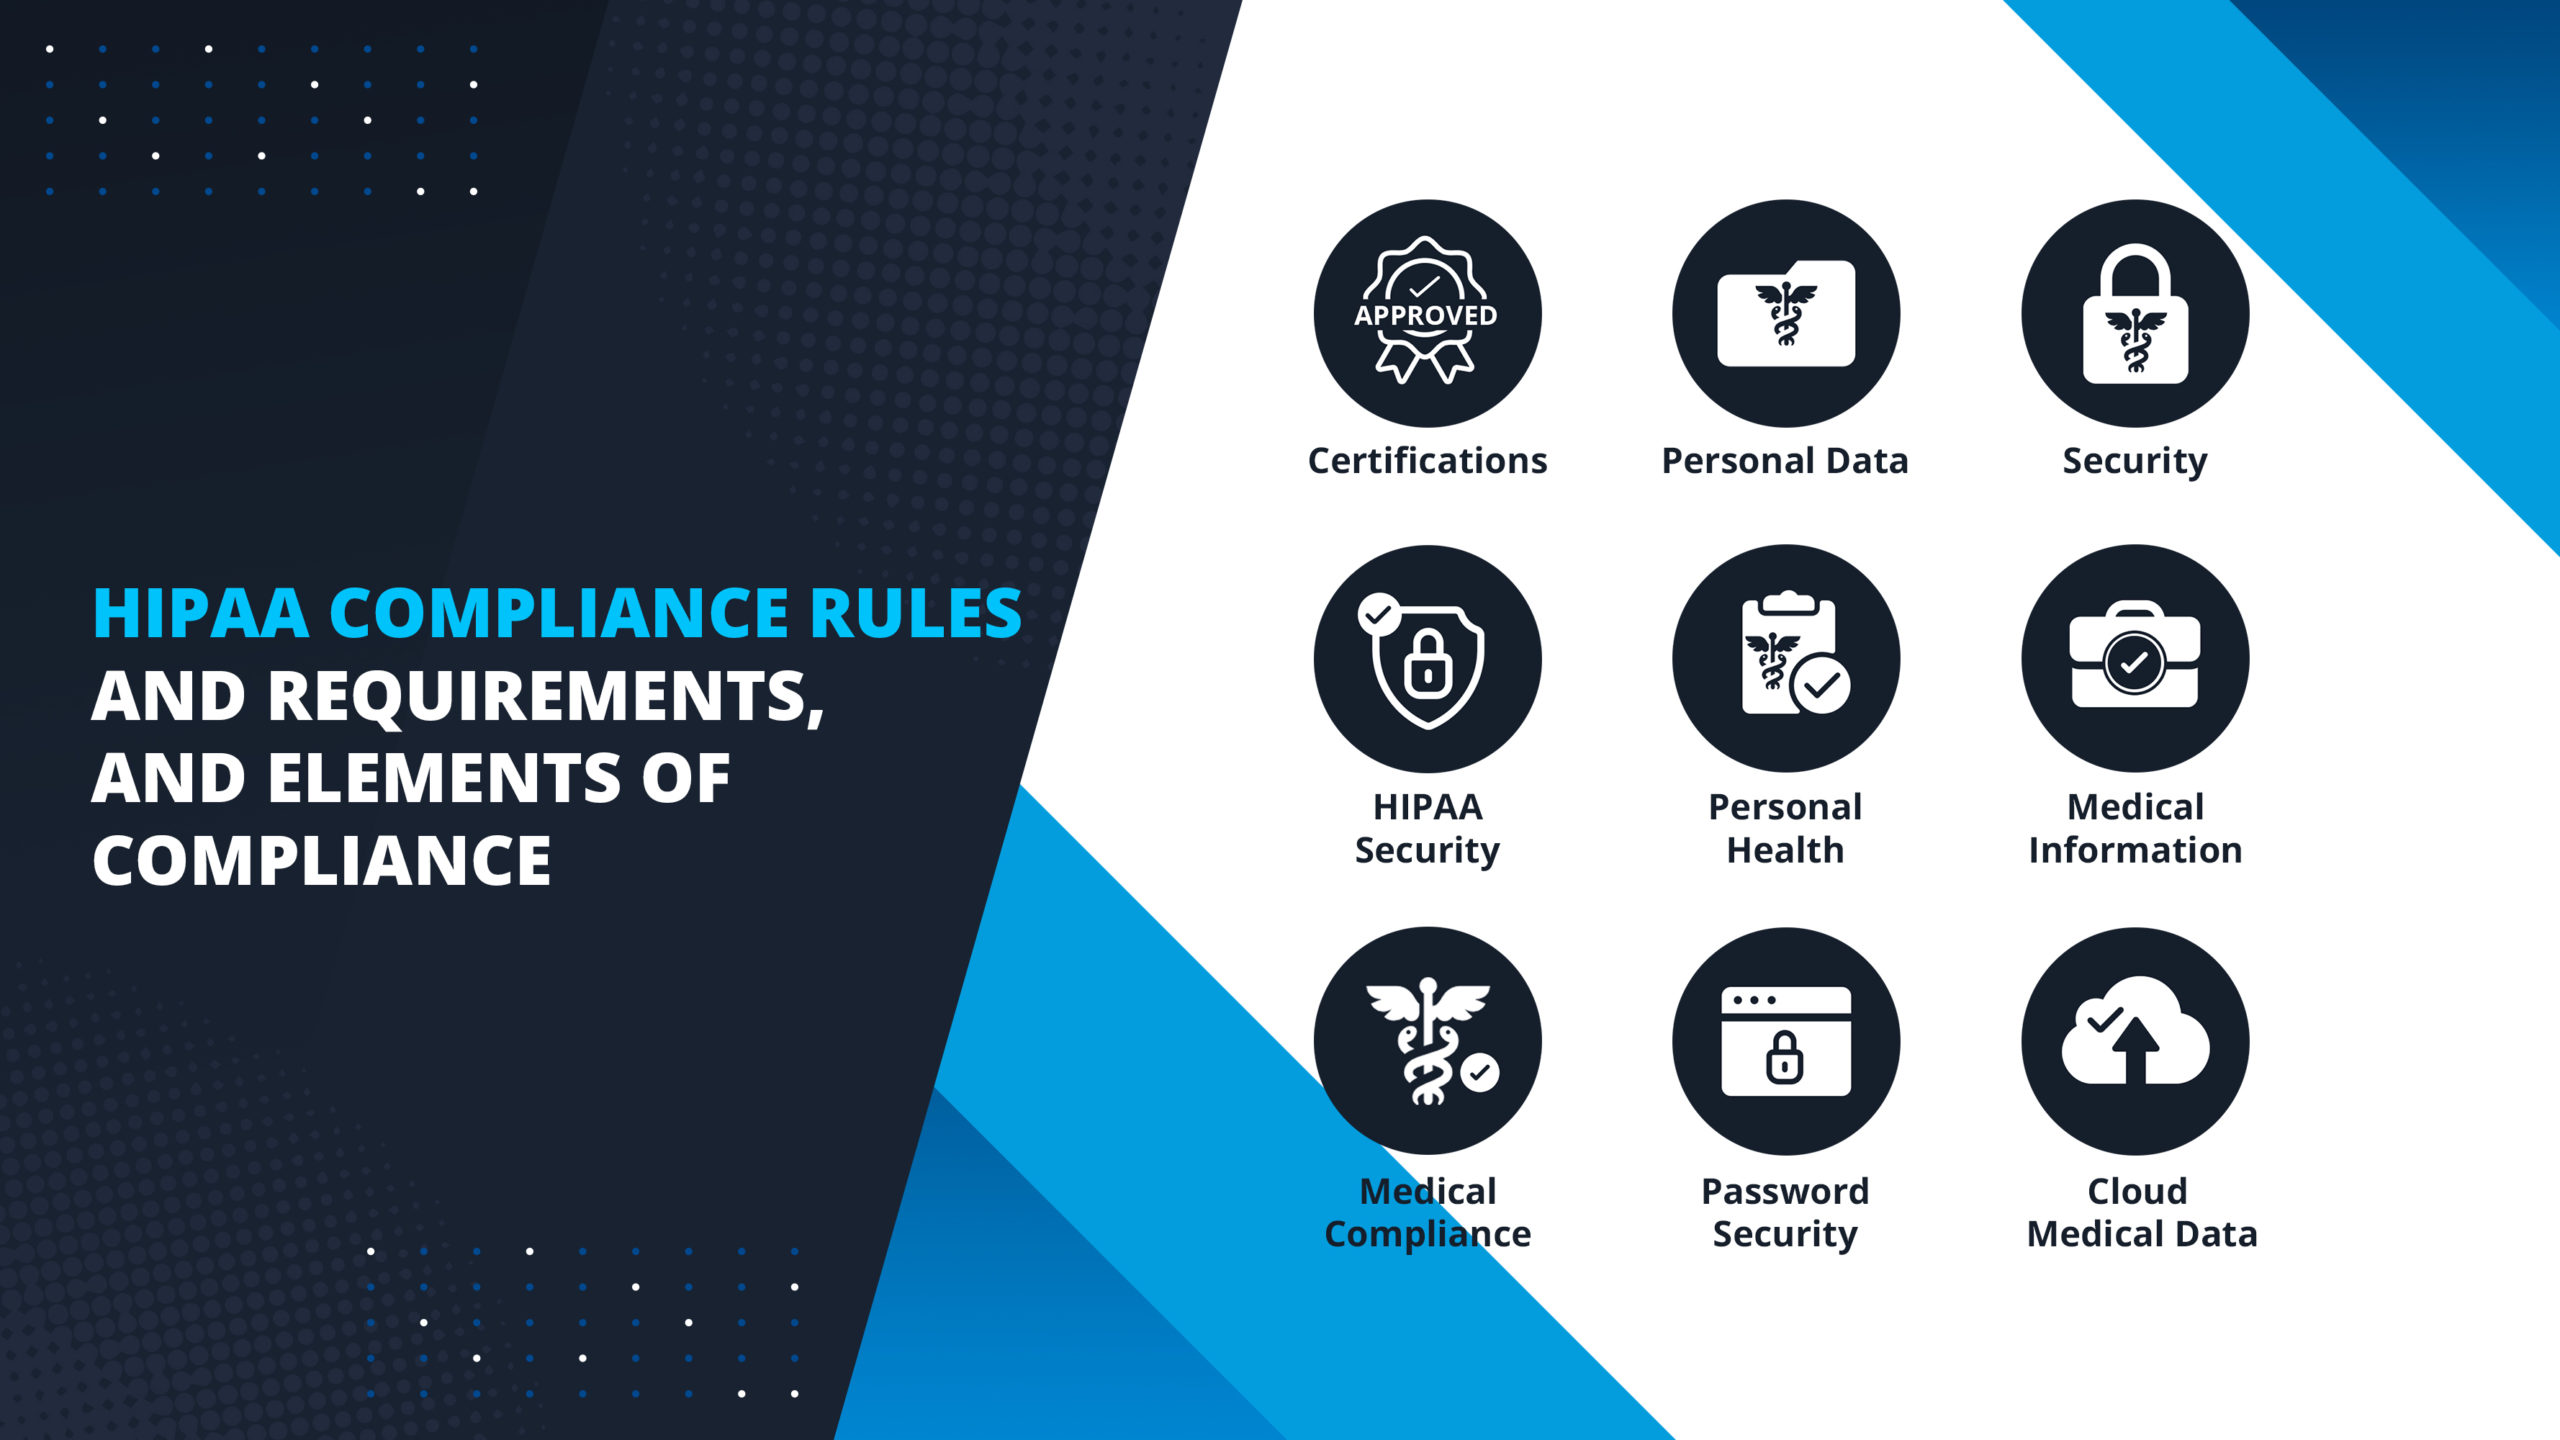 HIPAA Compliance Rules and requirements, and elements of compliance